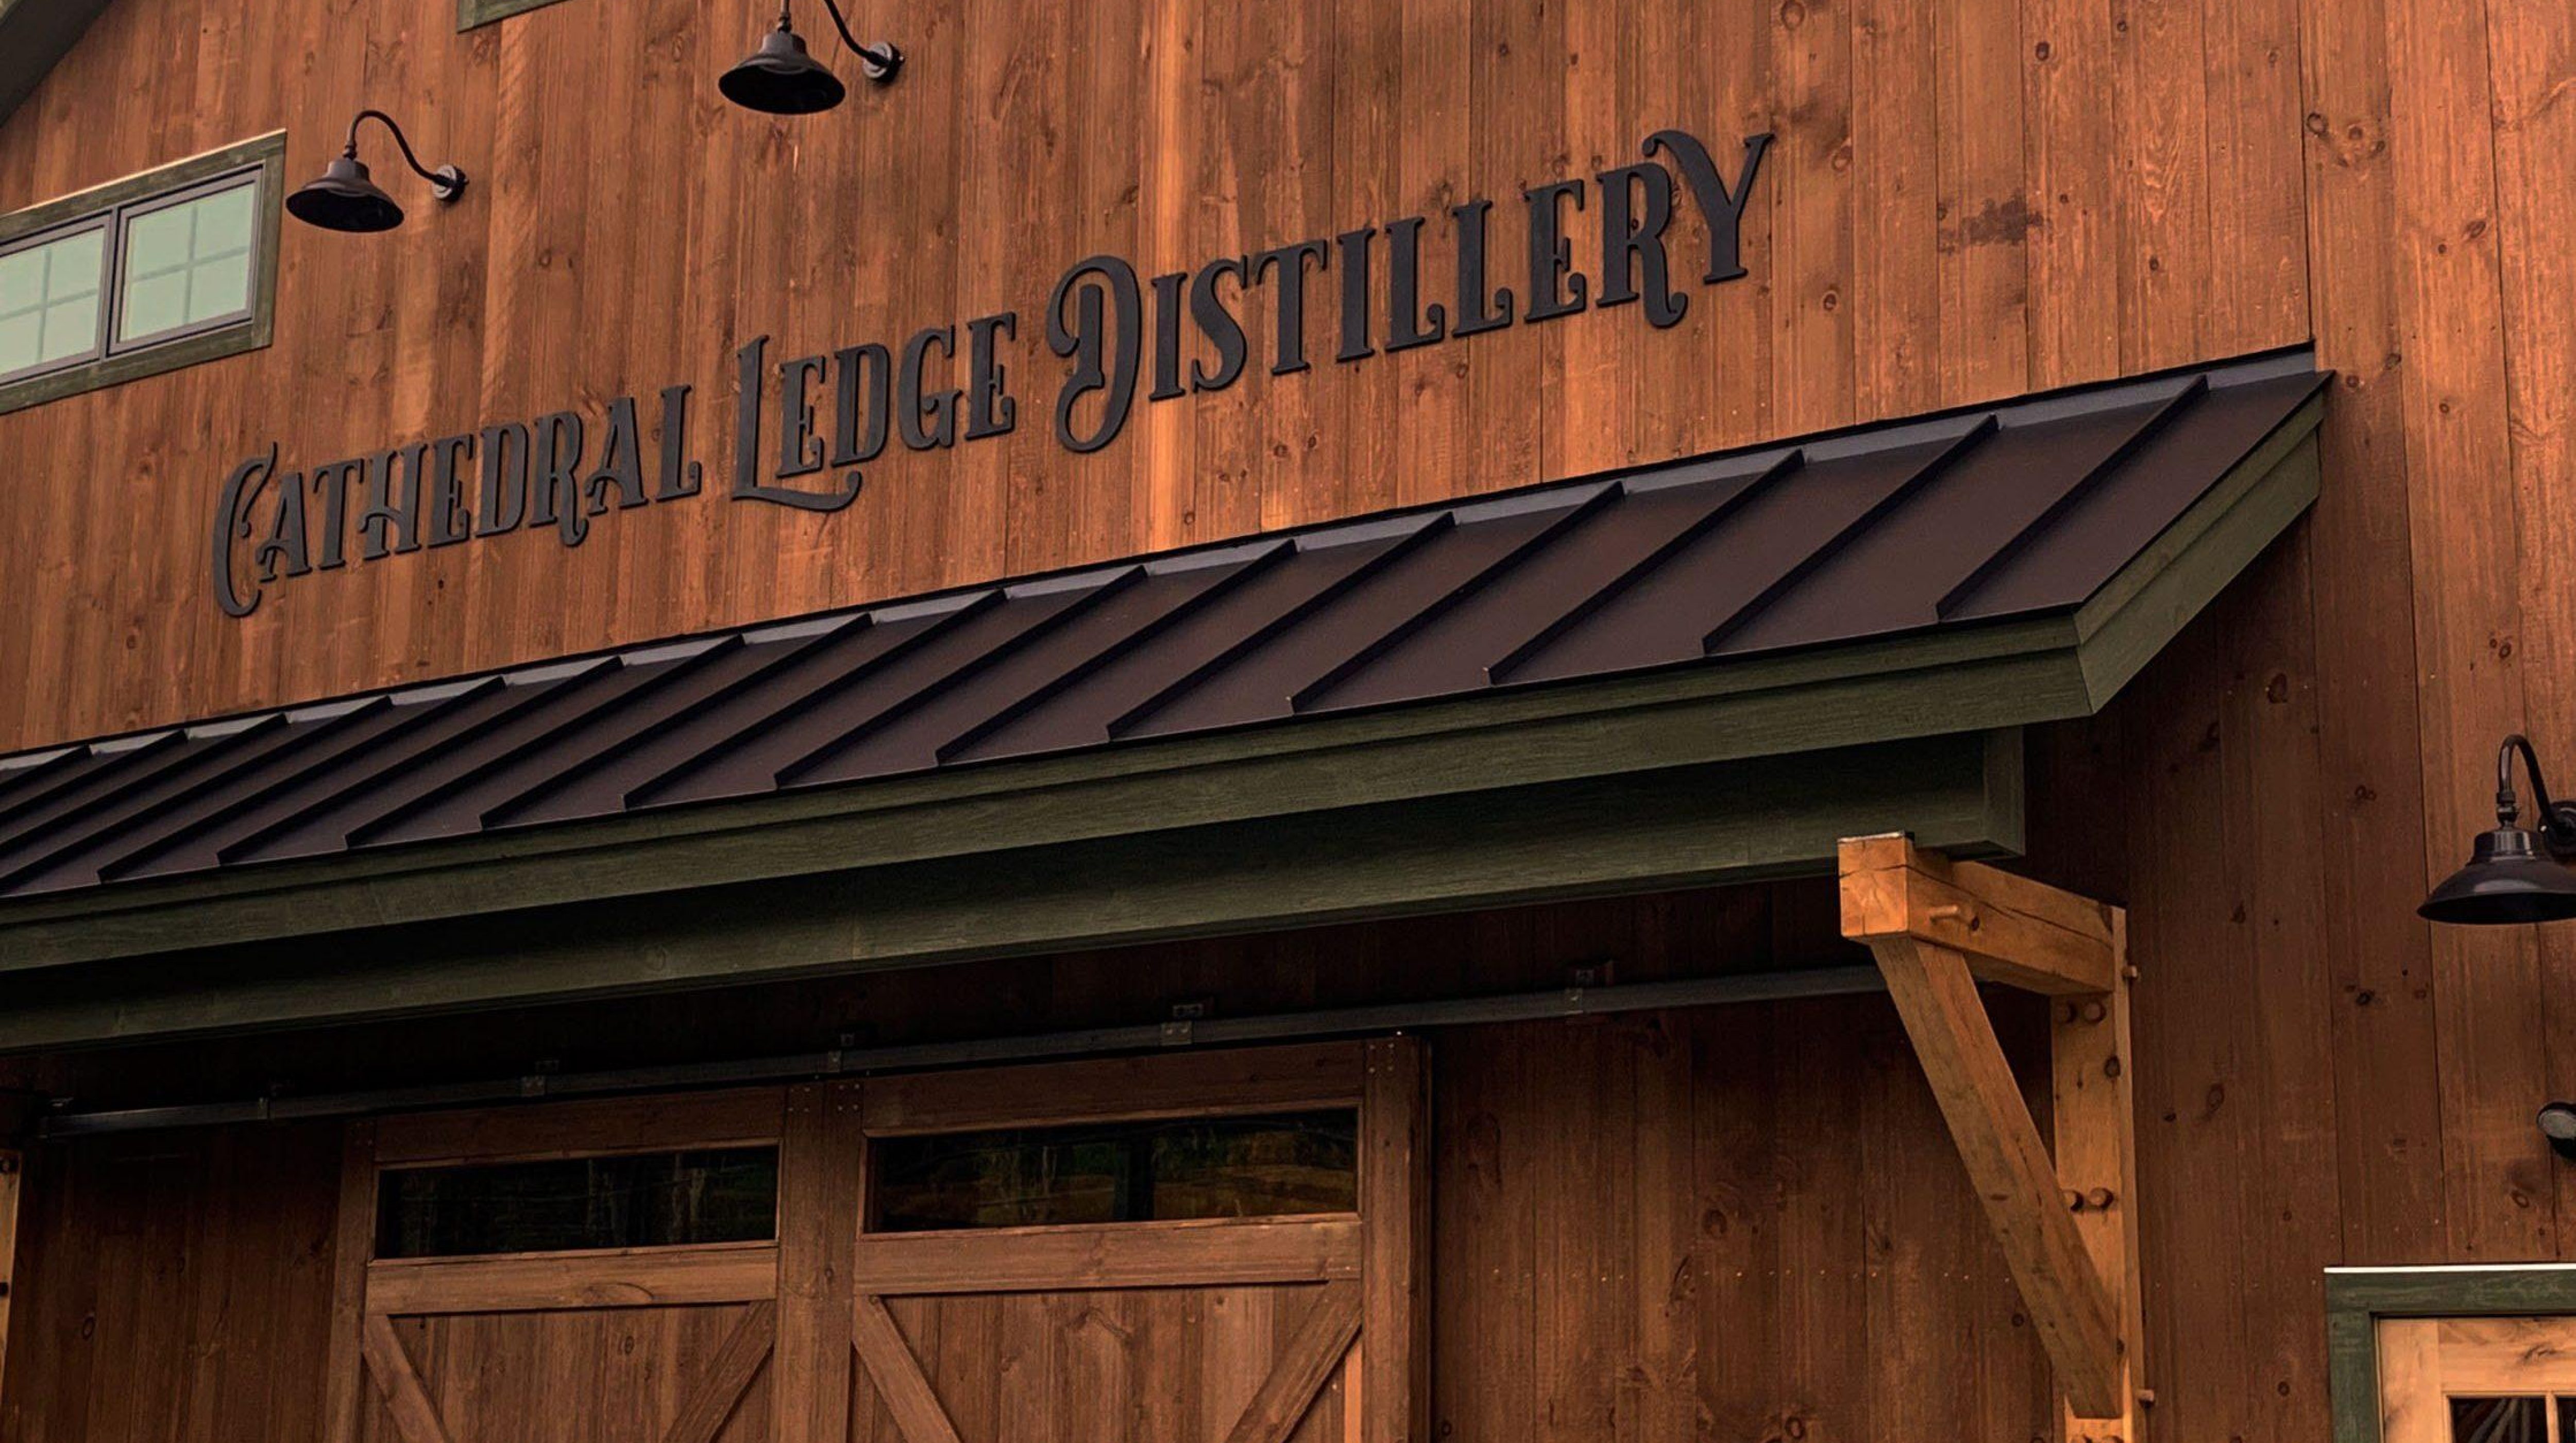 Barn Finished Exterior of Cathedral Ledge Distillery